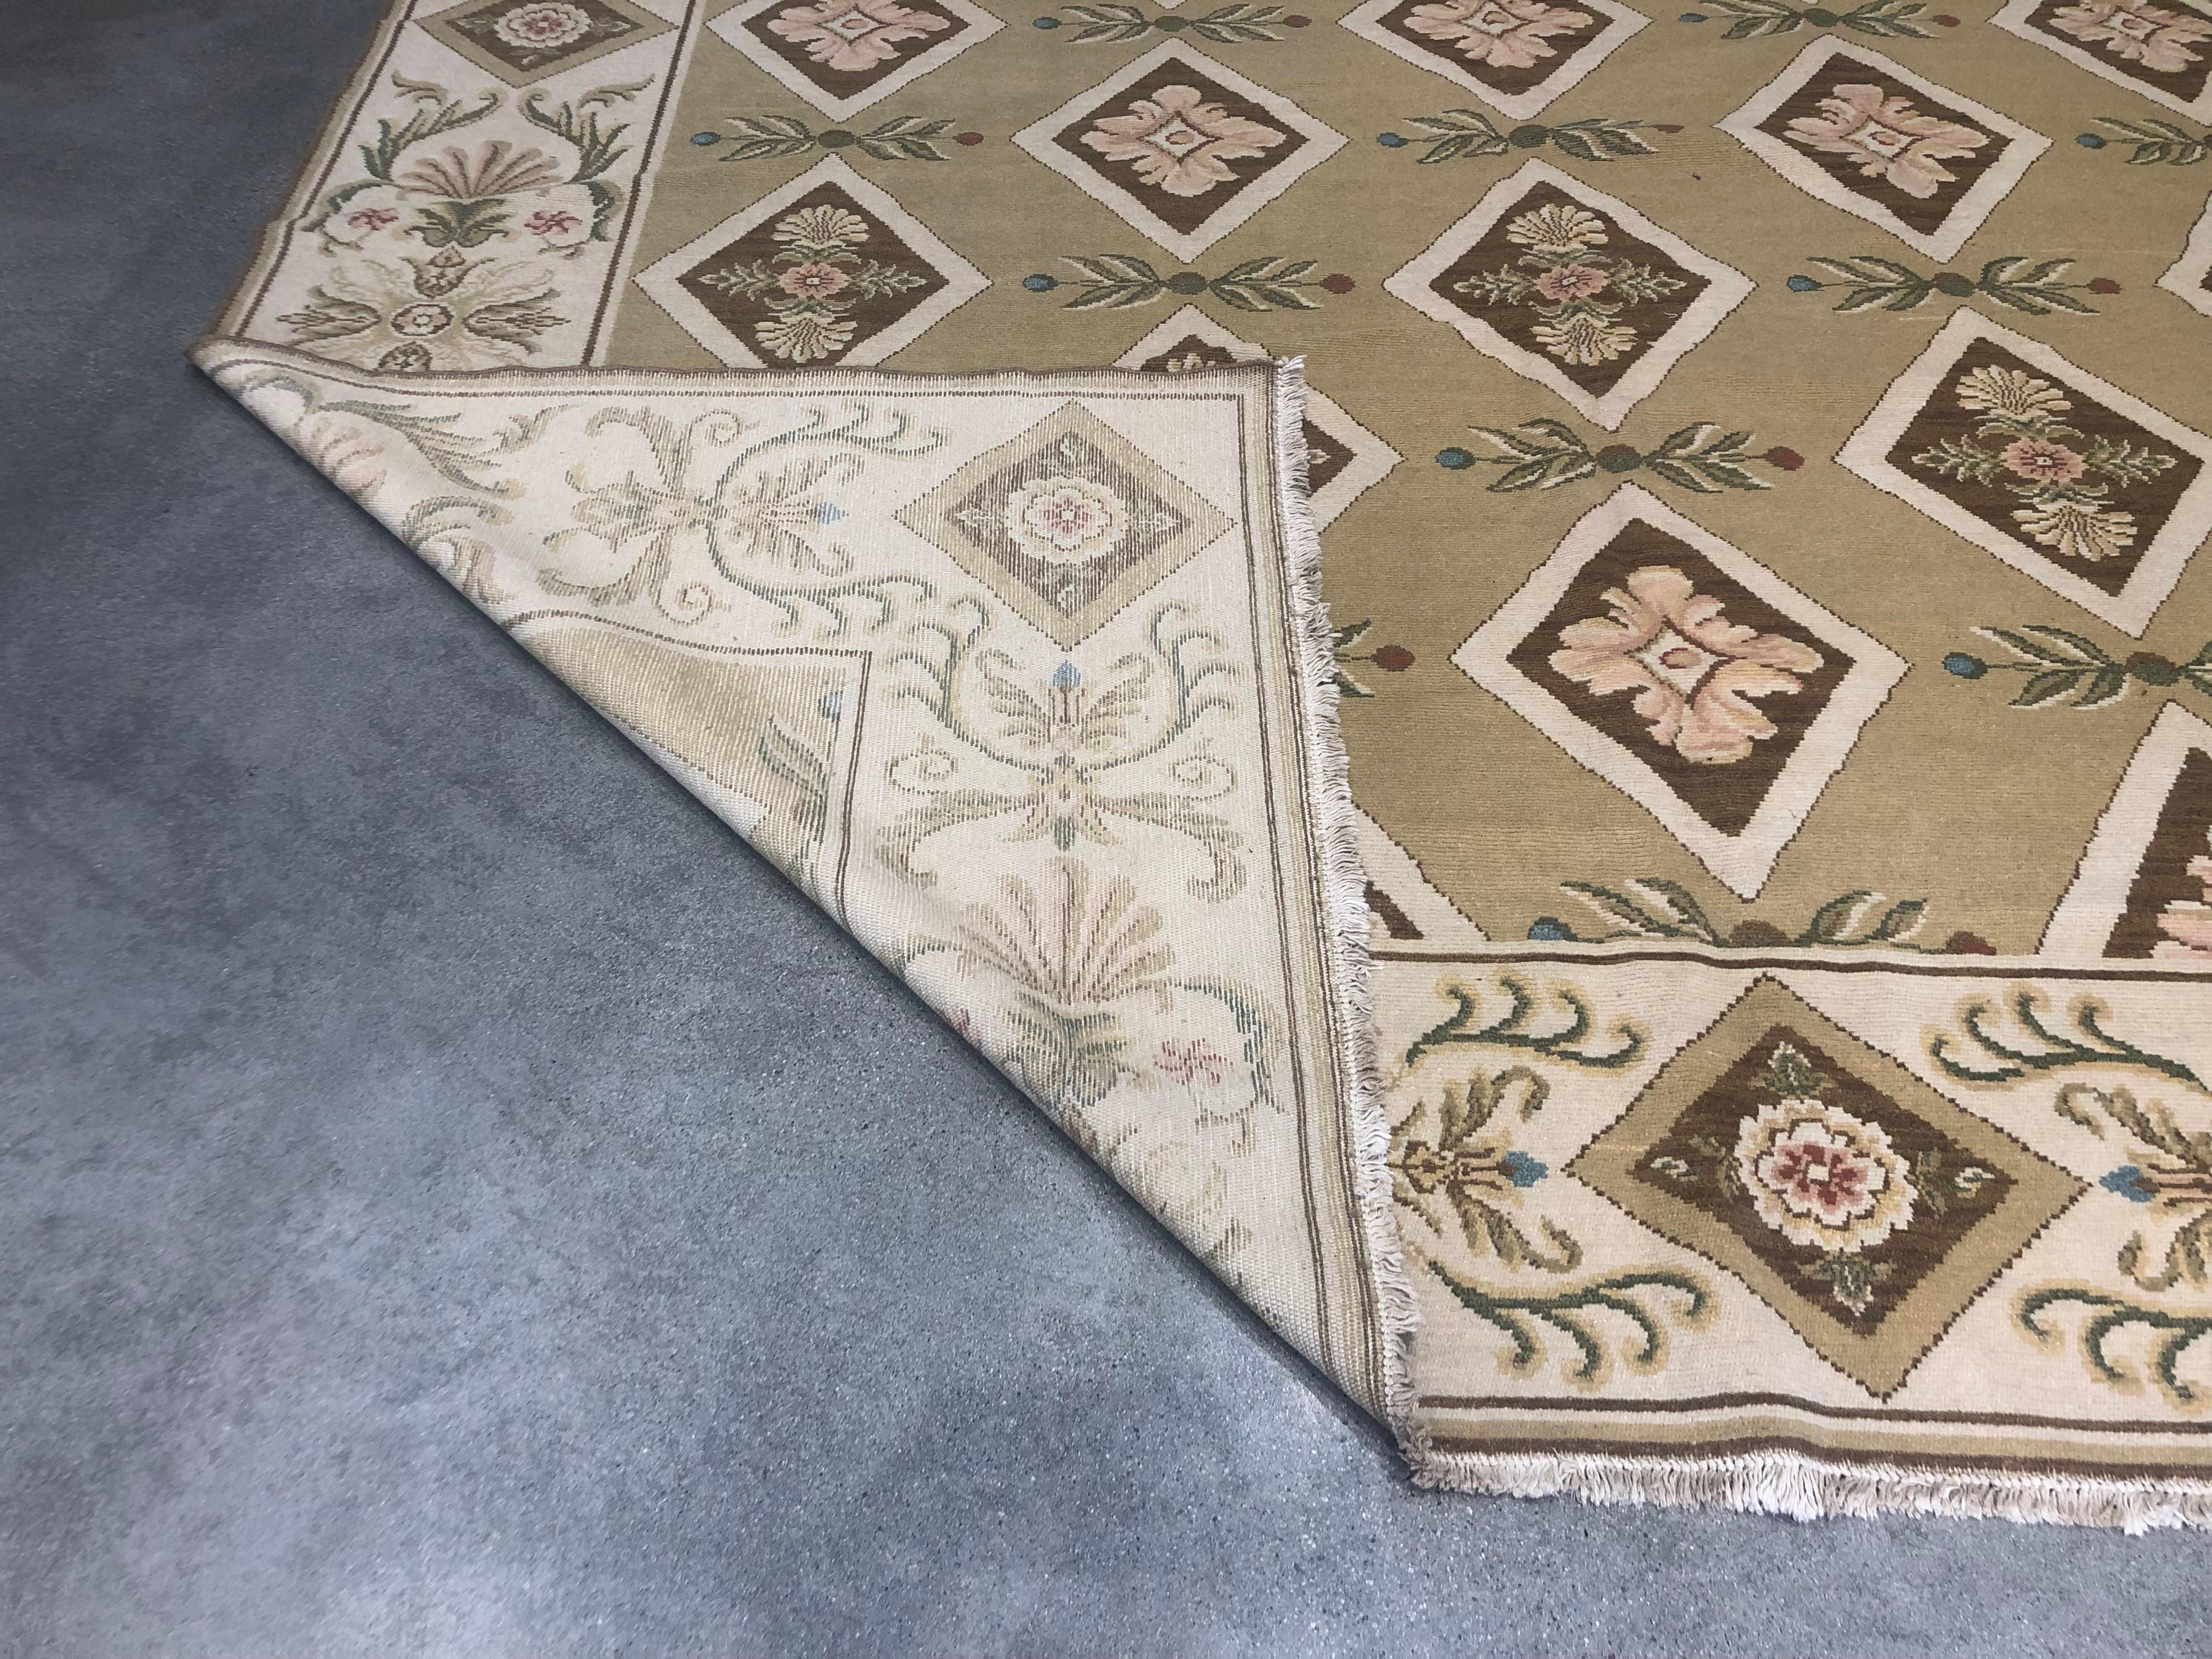 Flowers and diamonds combine beautifully against a gold center pane and beige border in this hand knotted wool rug.